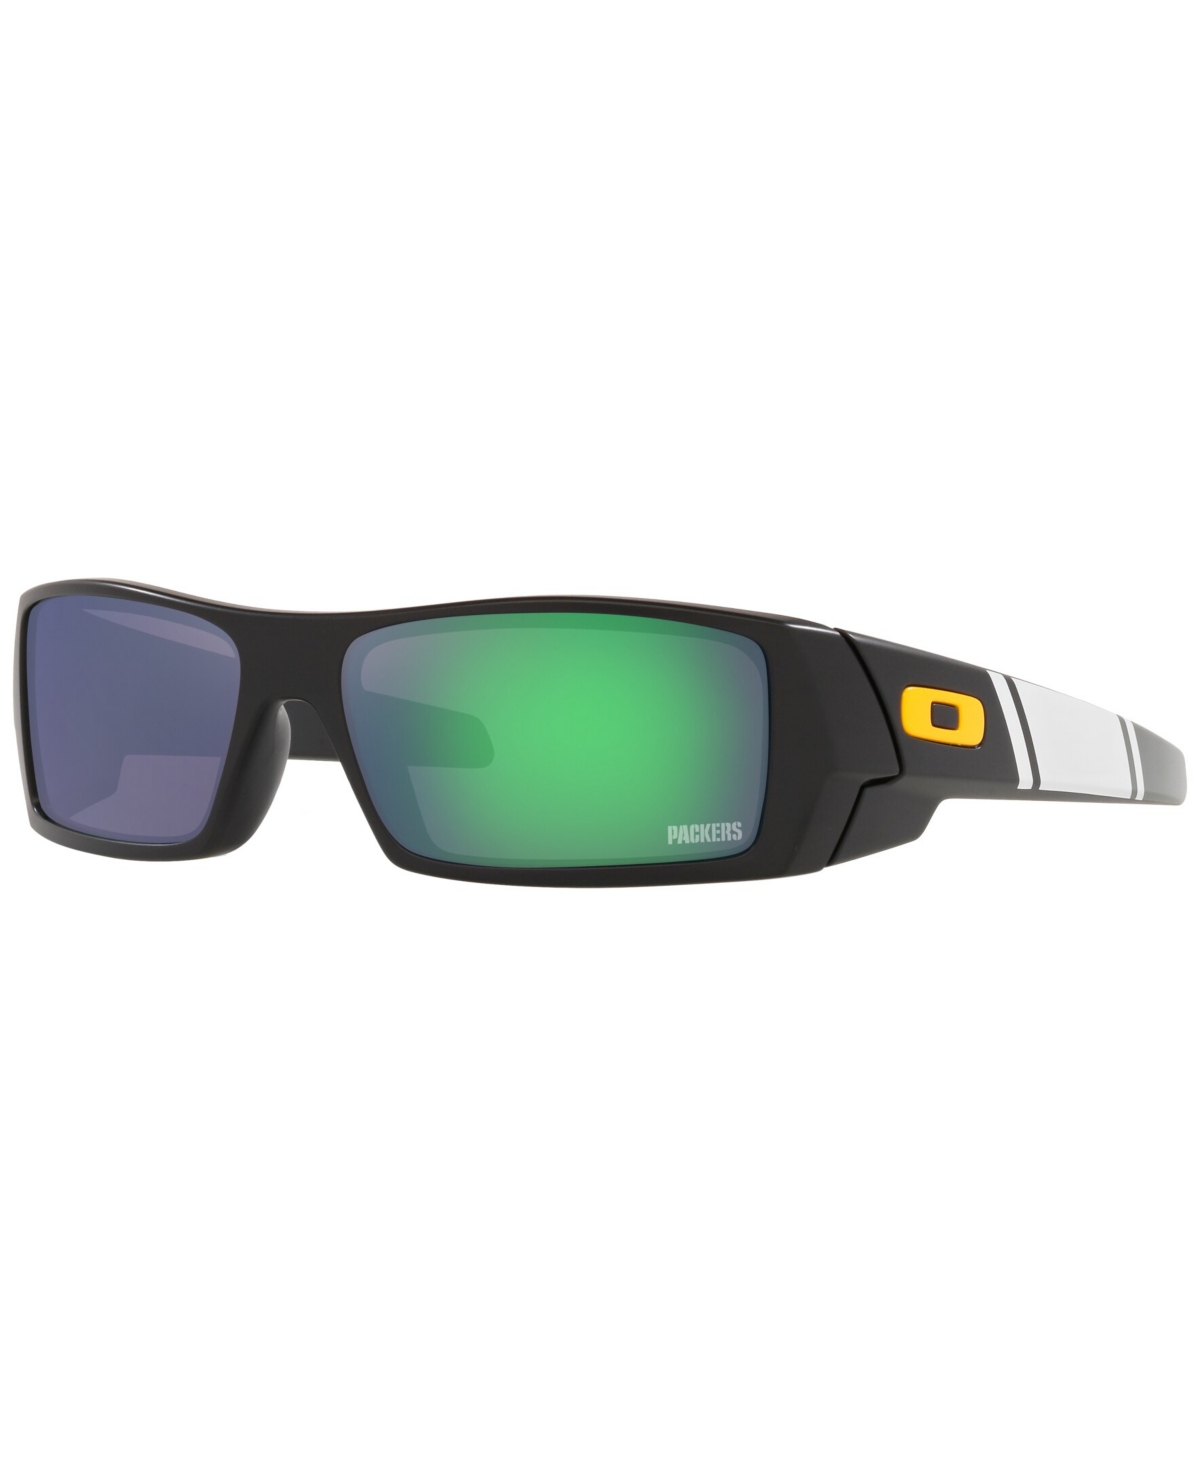 Shop Oakley Nfl Collection Men's Sunglasses, Green Bay Packers Oo9014 60 Gascan In Gb Matte Black